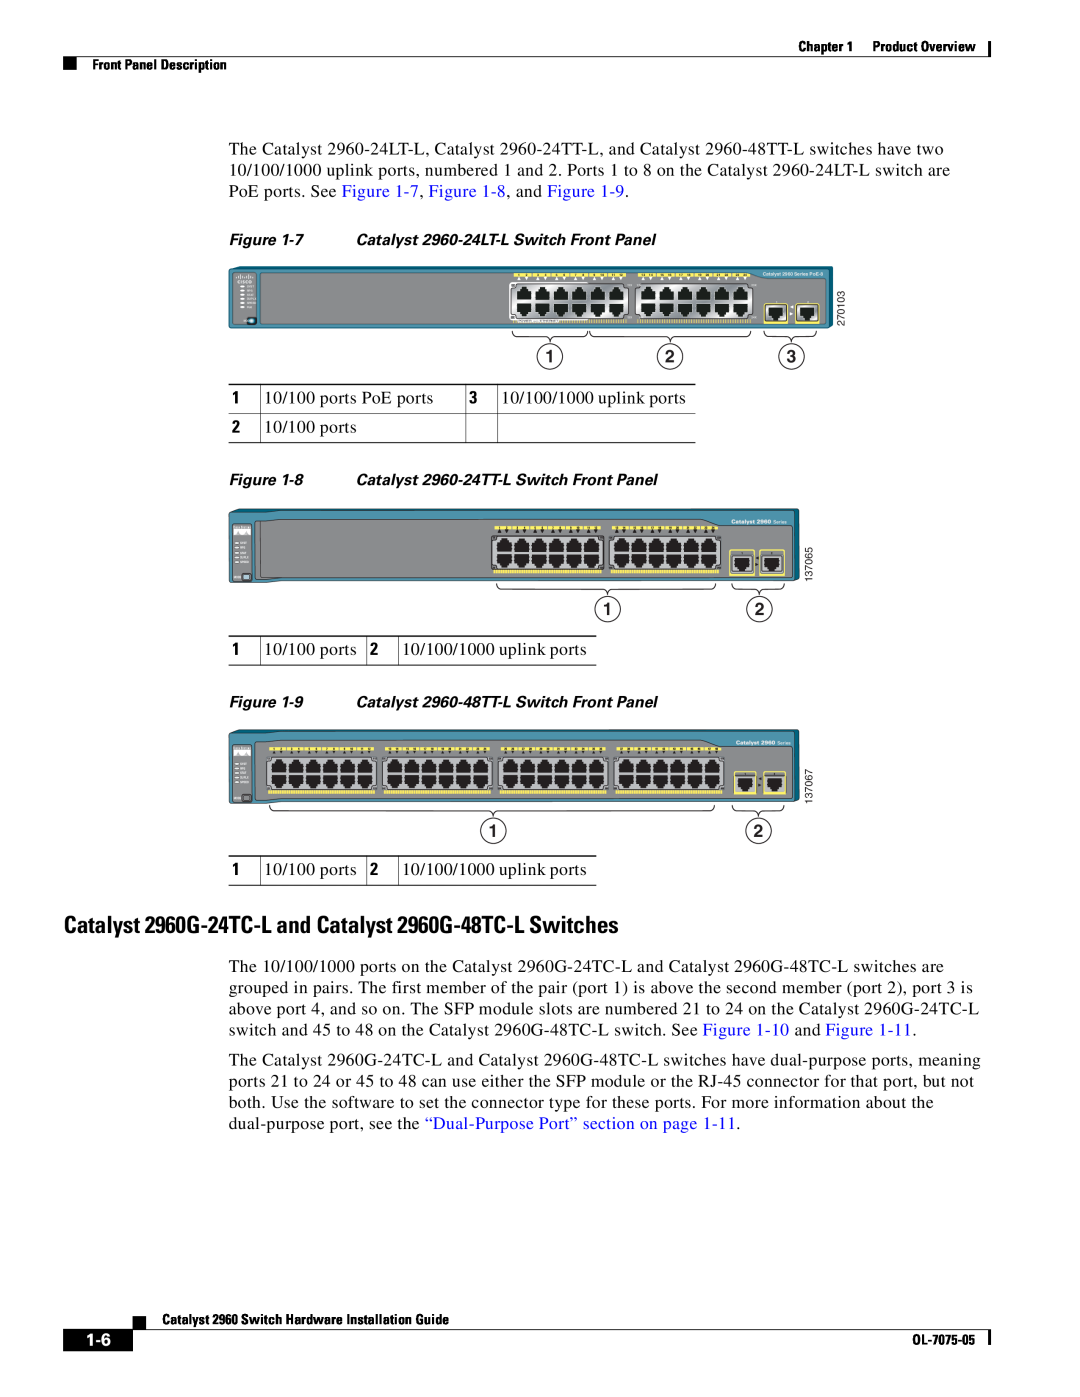 Cisco Systems specifications Catalyst 2960G-24TC-L and Catalyst 2960G-48TC-L Switches, 1 10/100 ports PoE ports 